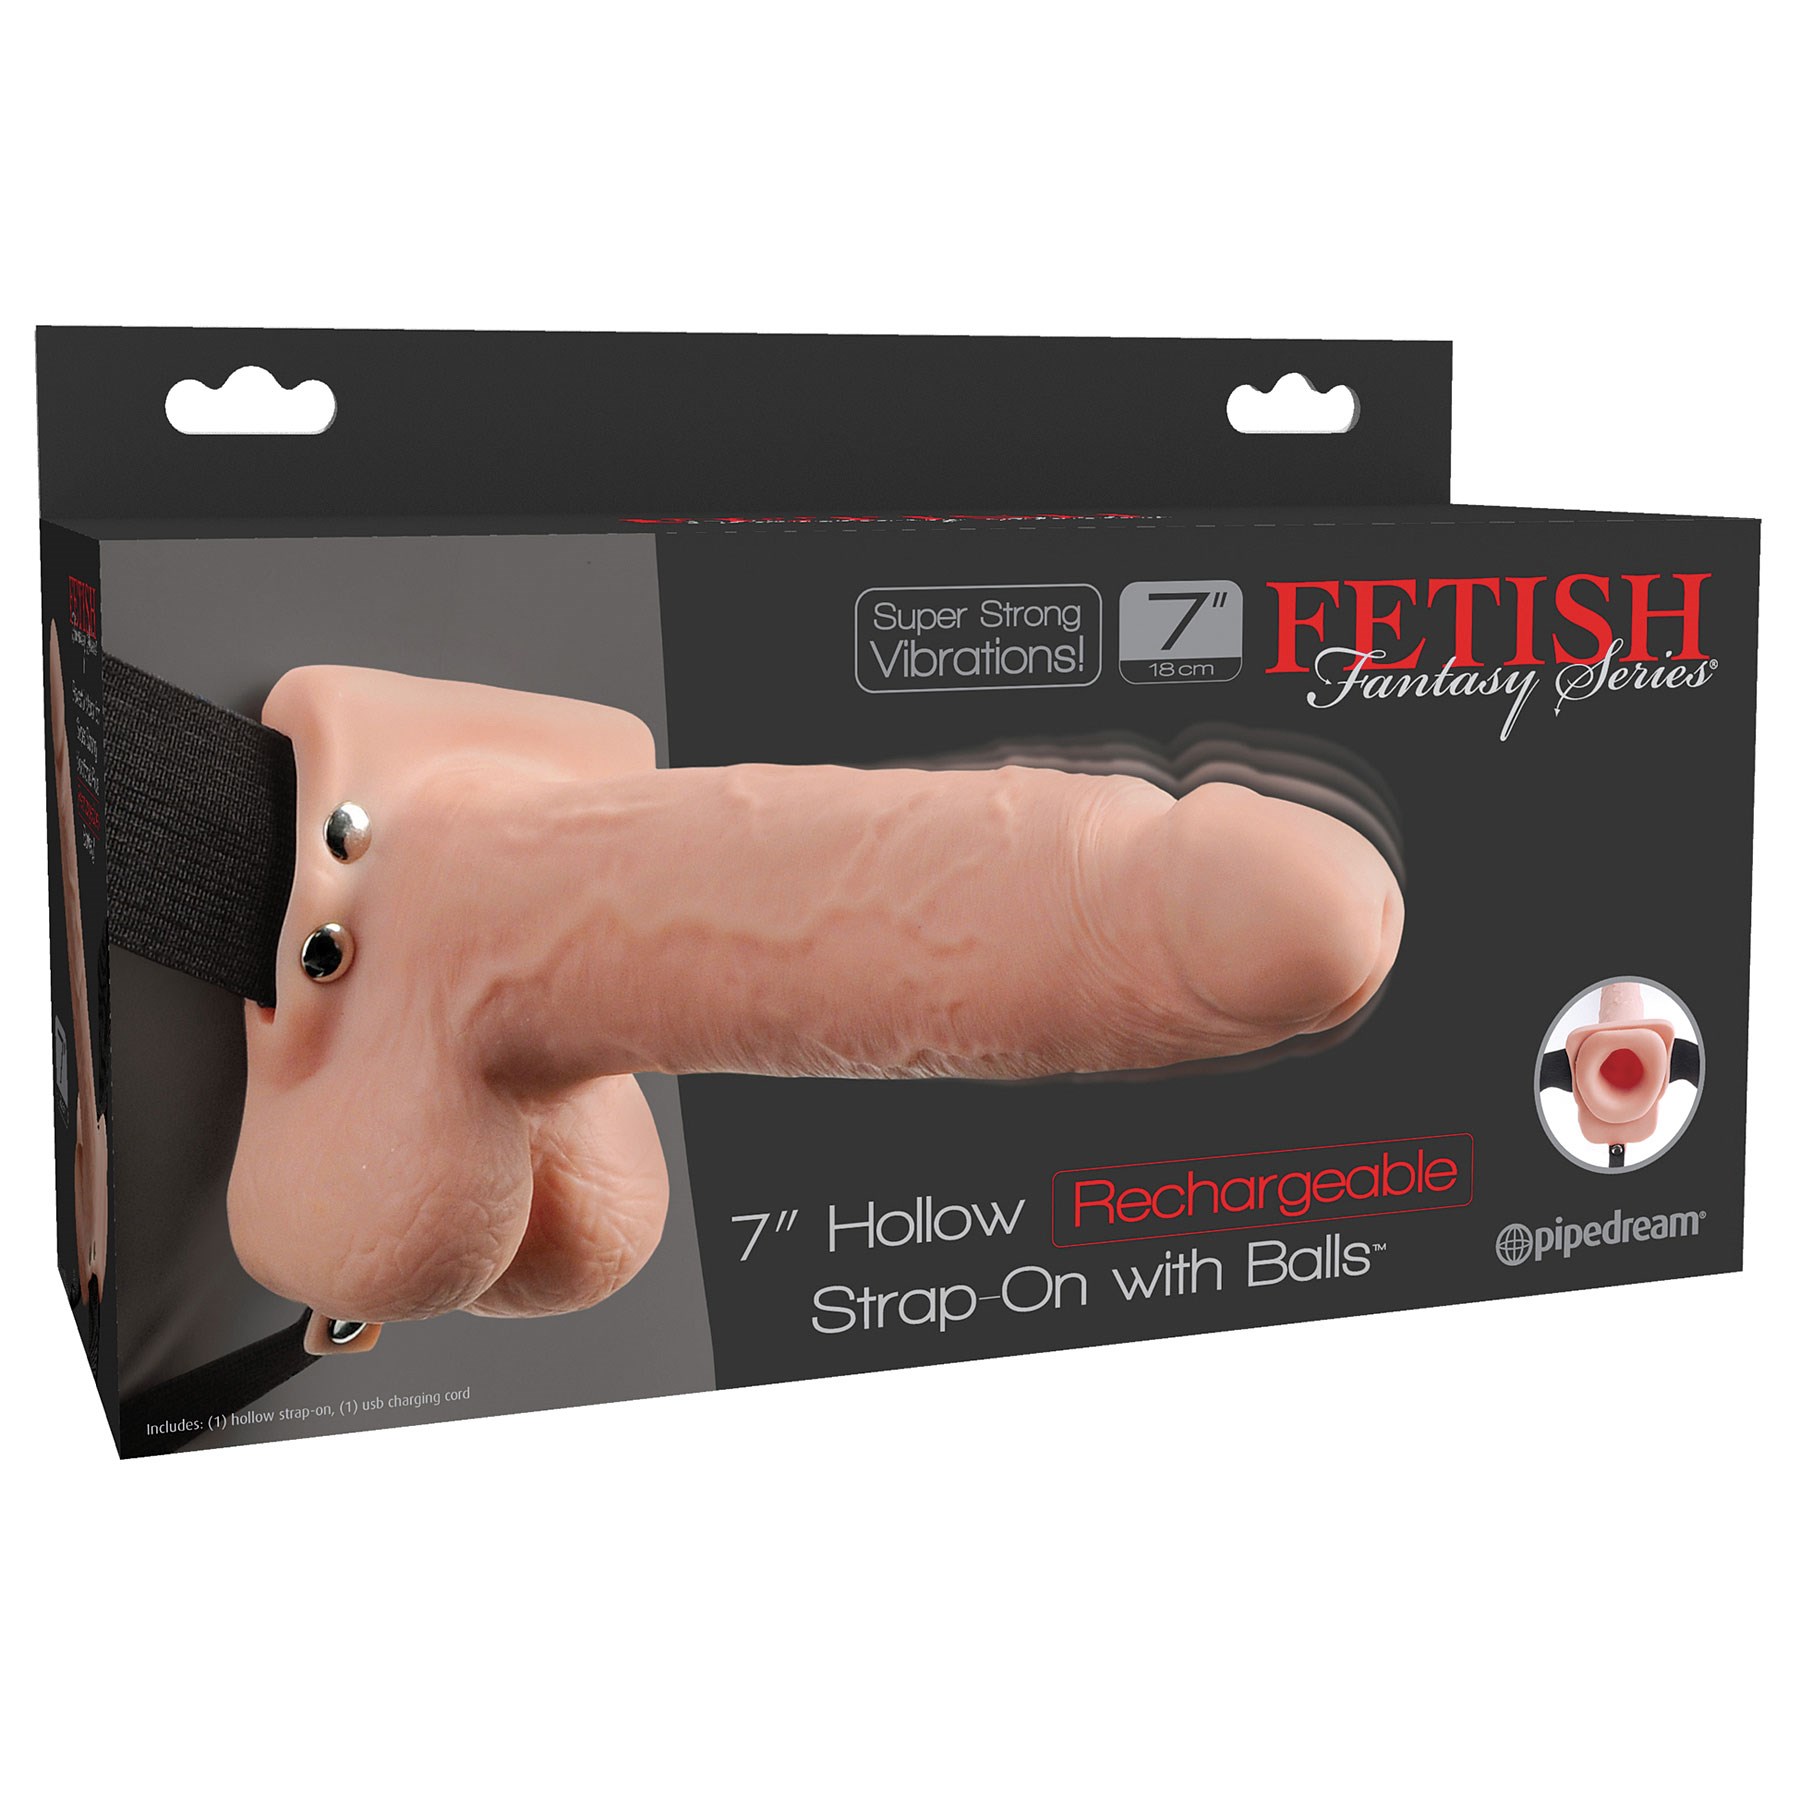 7" Hollow Rechargeable Strap-On With Balls box